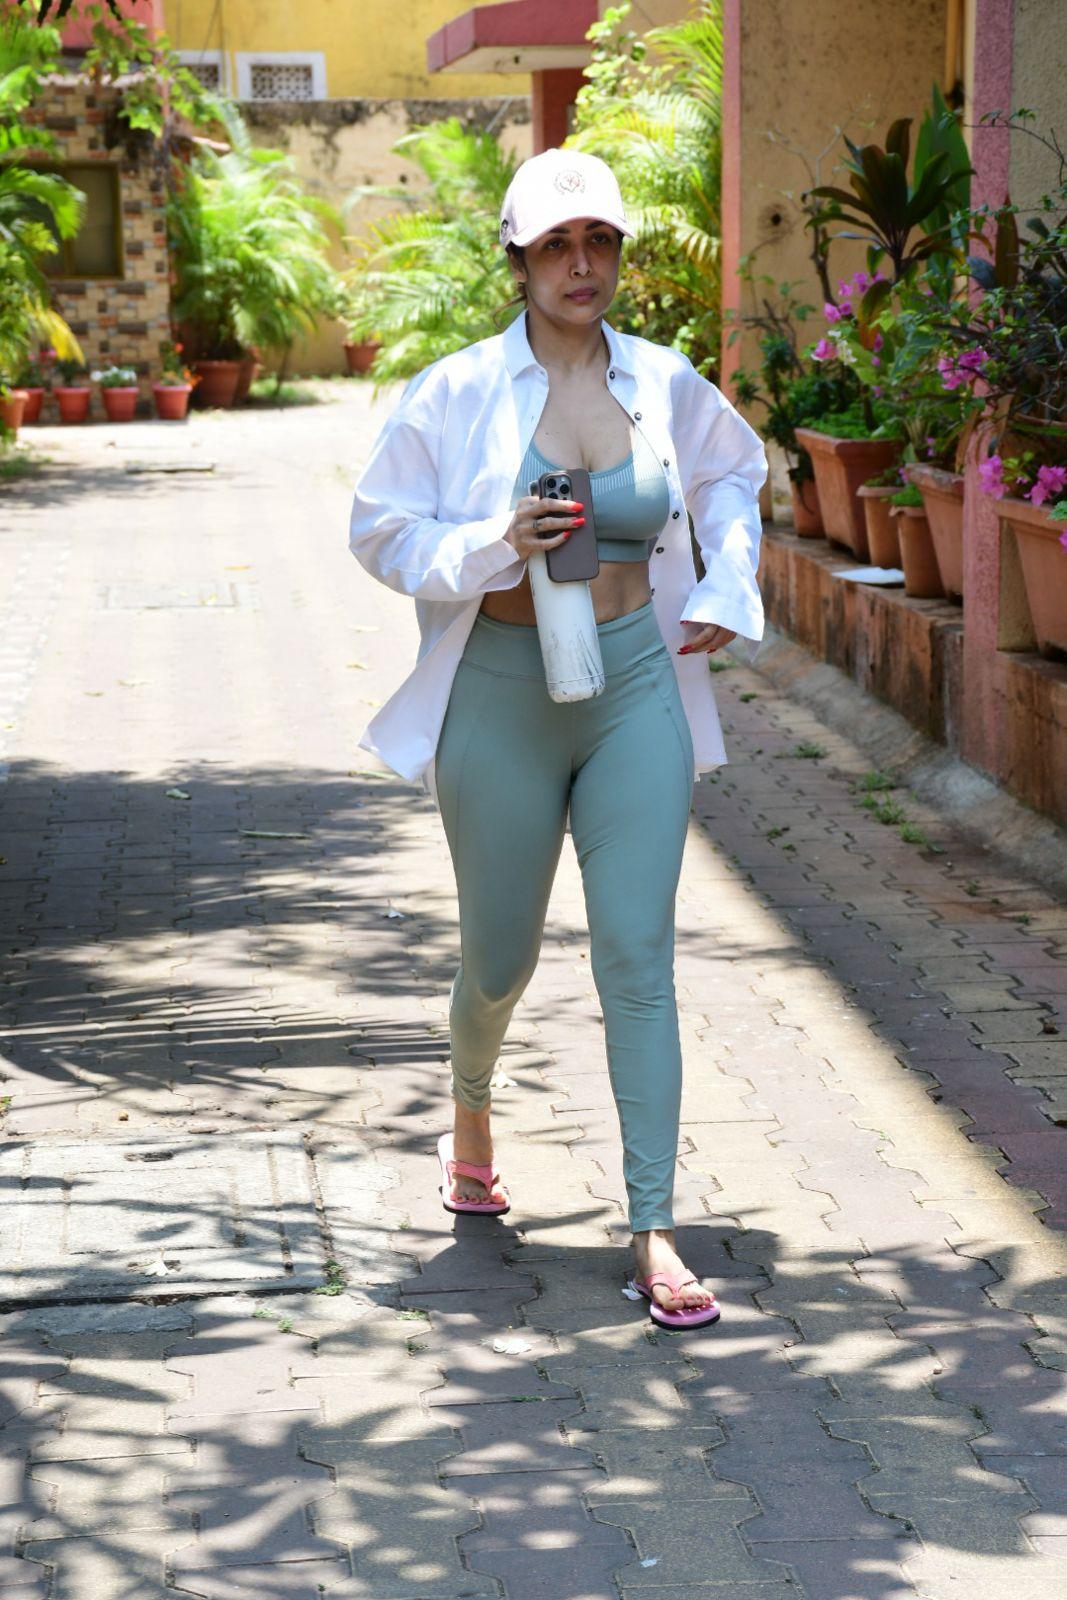 The actress wore the most adorable mint green athleisure outfit for her workout session today.